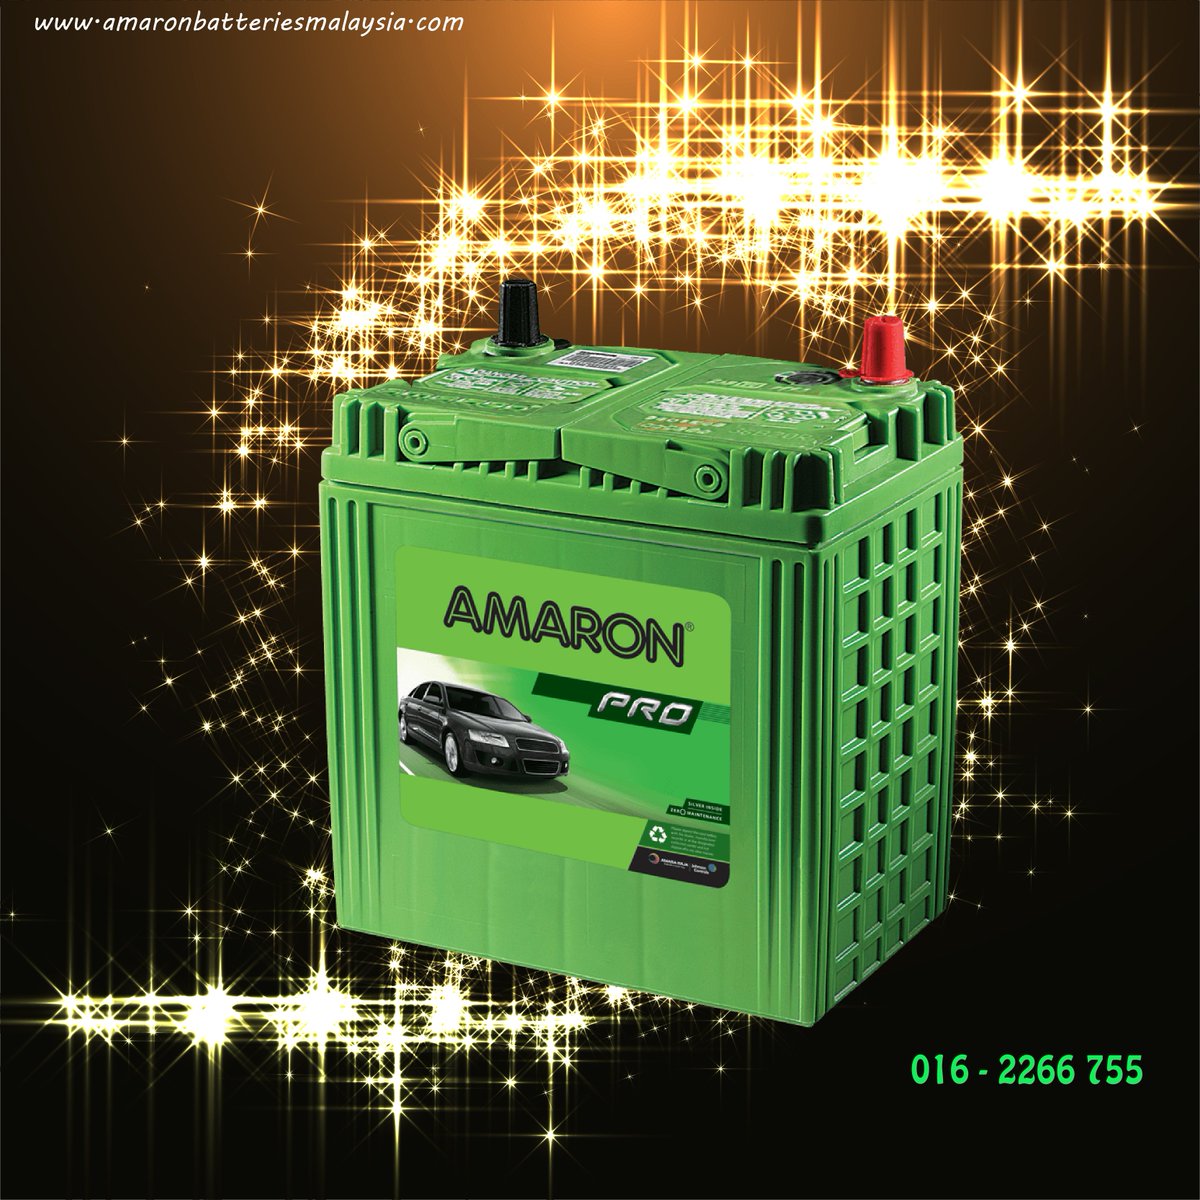 Amaron Battery Malaysia provide car battery delivery & replacement service in Selangor,Kuala Lumpur.
Call 016-2266755
#amaron #amarongo #amaronkl #amaronmalaysia #amaronbattery #maintenancefreebattery #batterylastslong #batteryshop #batterydelivery #freedelivery #freeinstallation